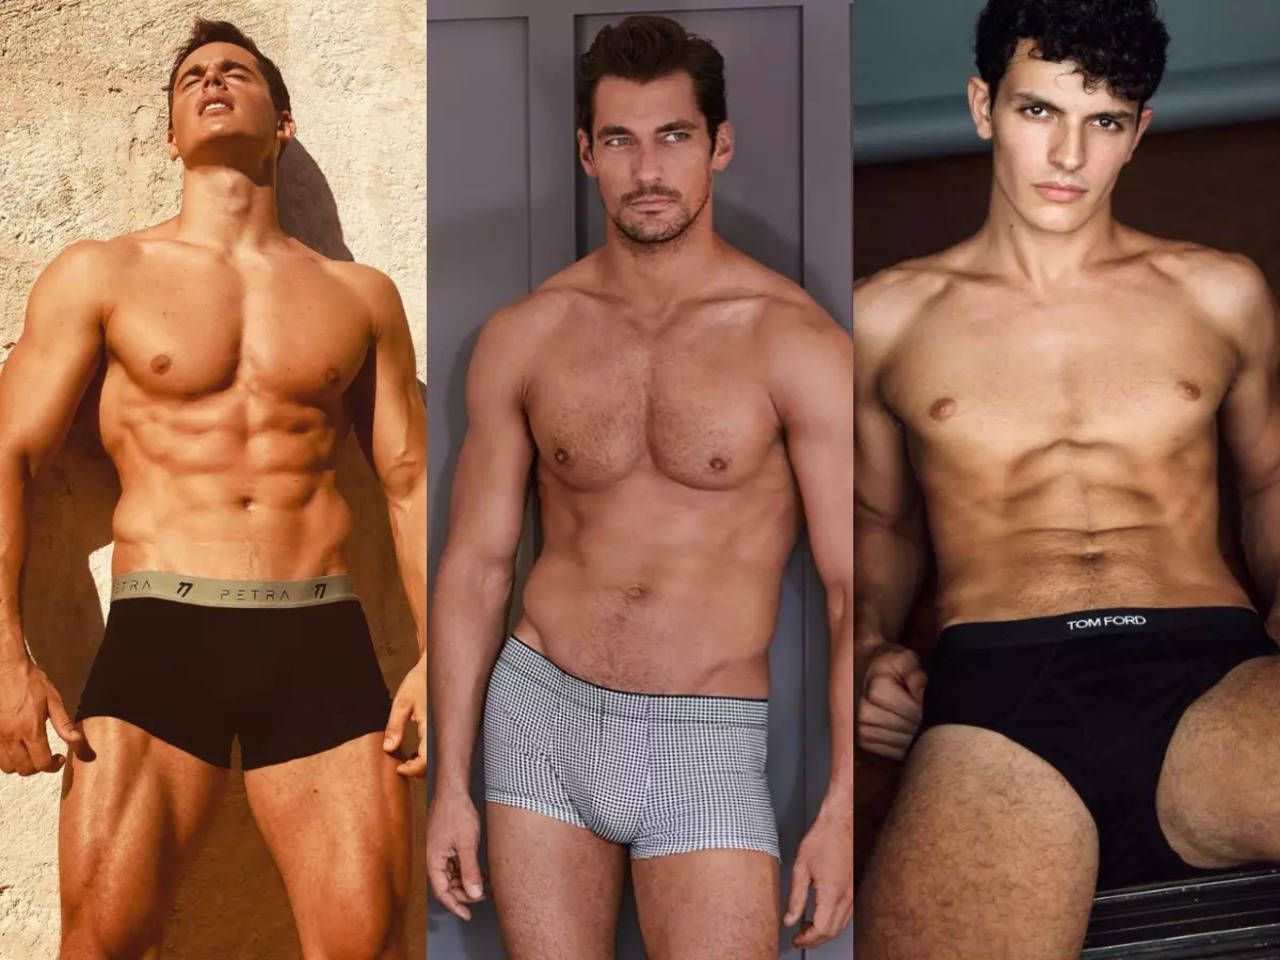 Arctic Klap Duizeligheid How to pick the right underwear according to your body type - Times of India